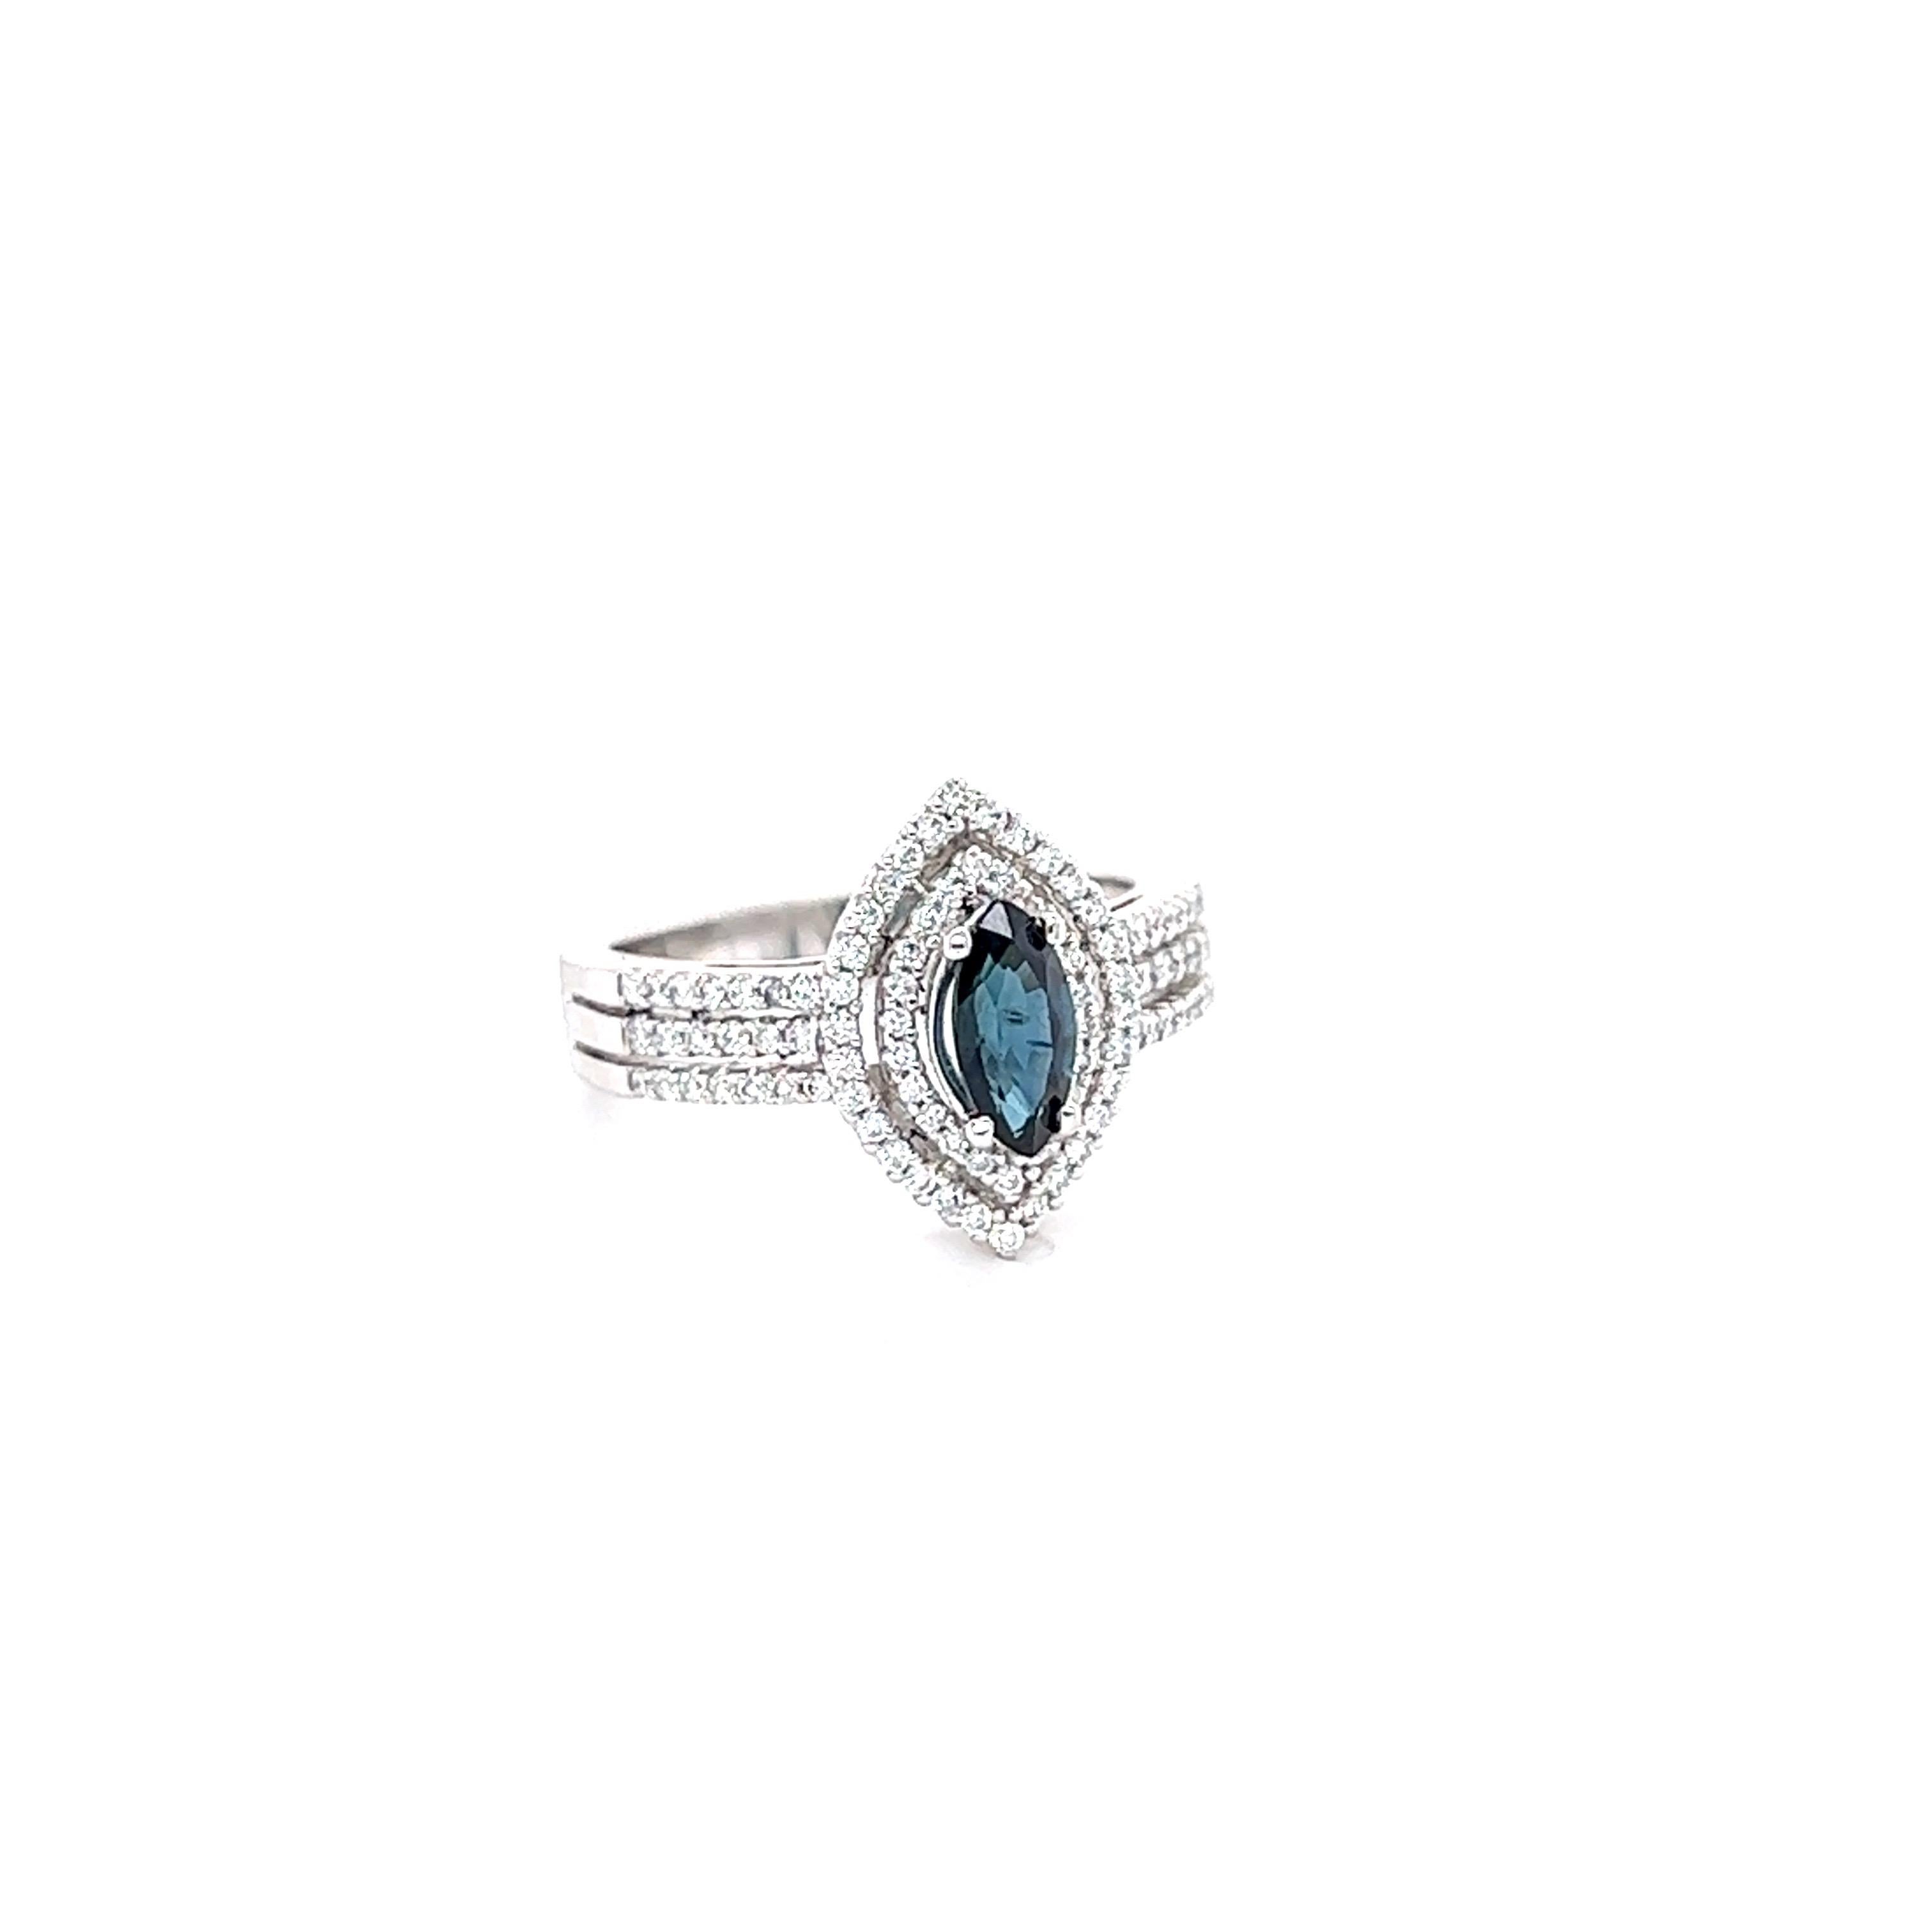 This beautiful ring has a 0.80 Carat Marquise Cut Blue Sapphire that measures at 8 mm x 4 mm and is surrounded by 94 Round Cut Diamonds that weigh 0.41 Carats. The Total Carat Weight of the ring is 1.21 Carats.  
The ring is made in 18K White Gold